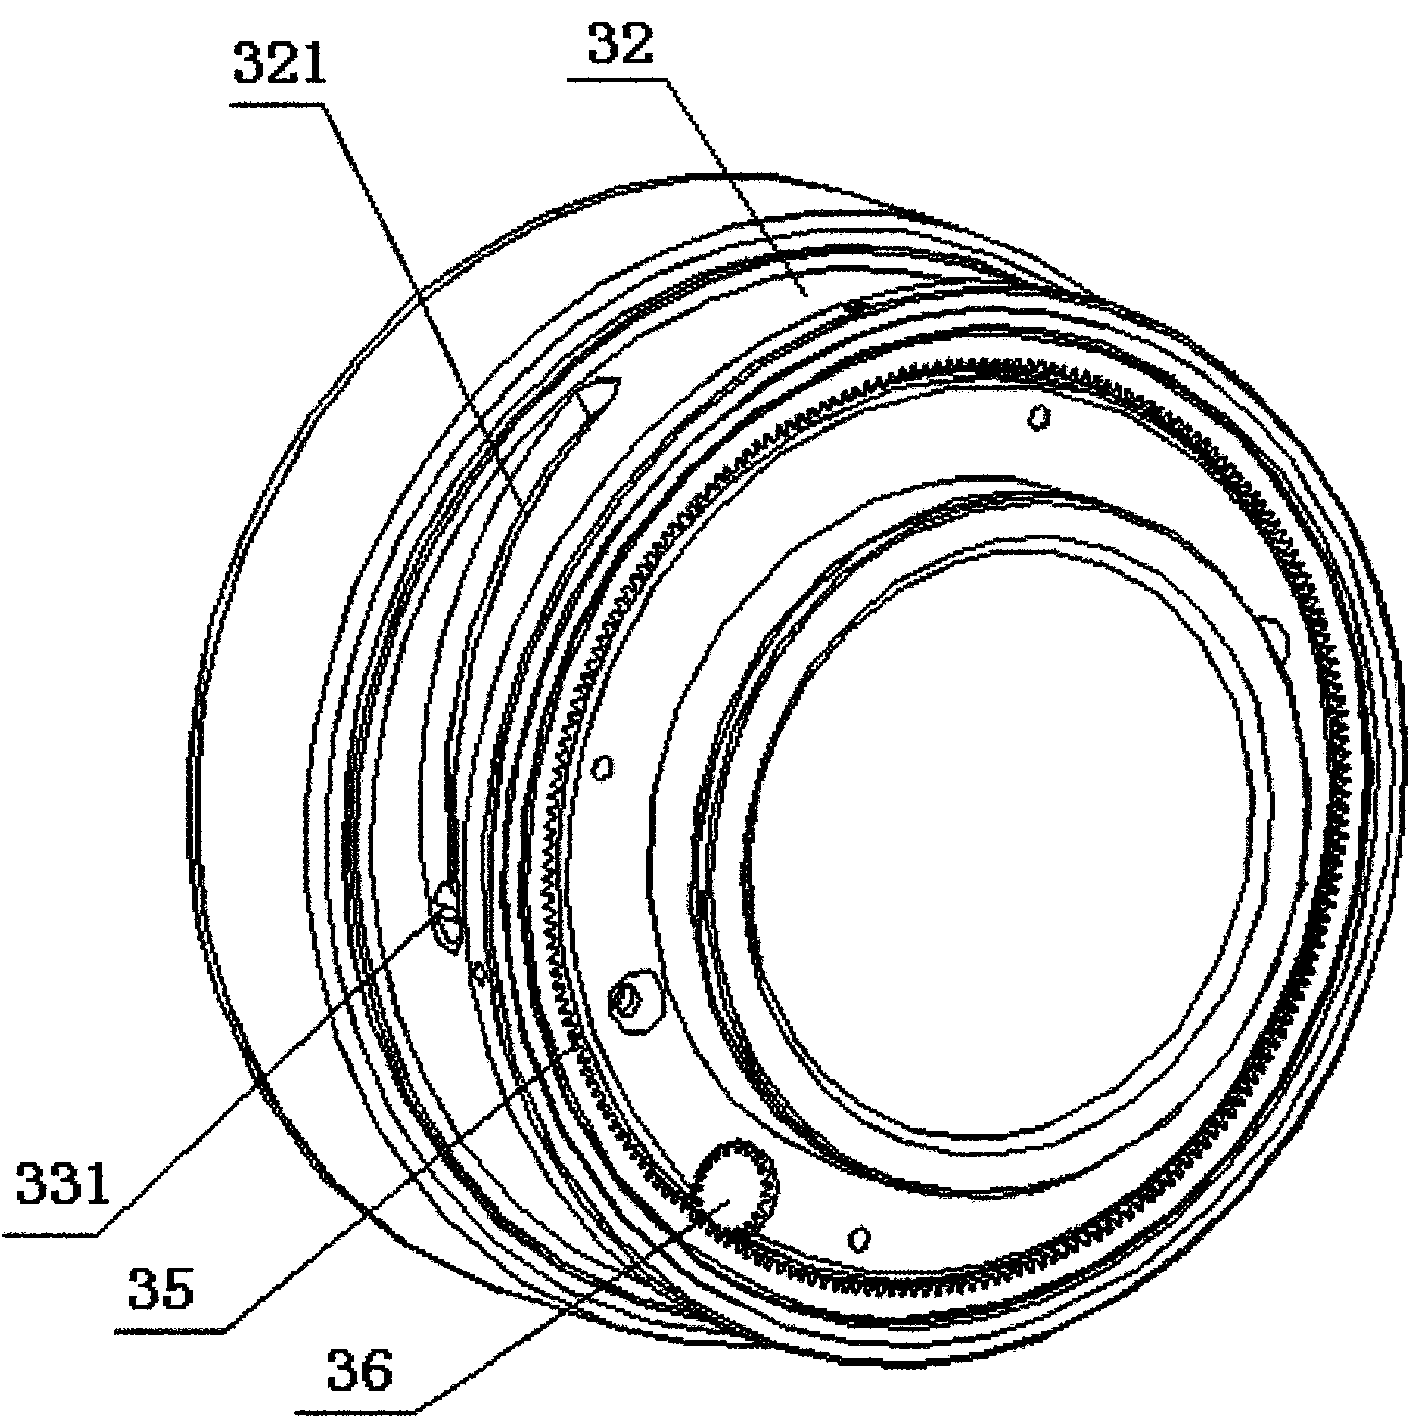 Manual-automatic focusing integrated lens and infrared thermal imager using same